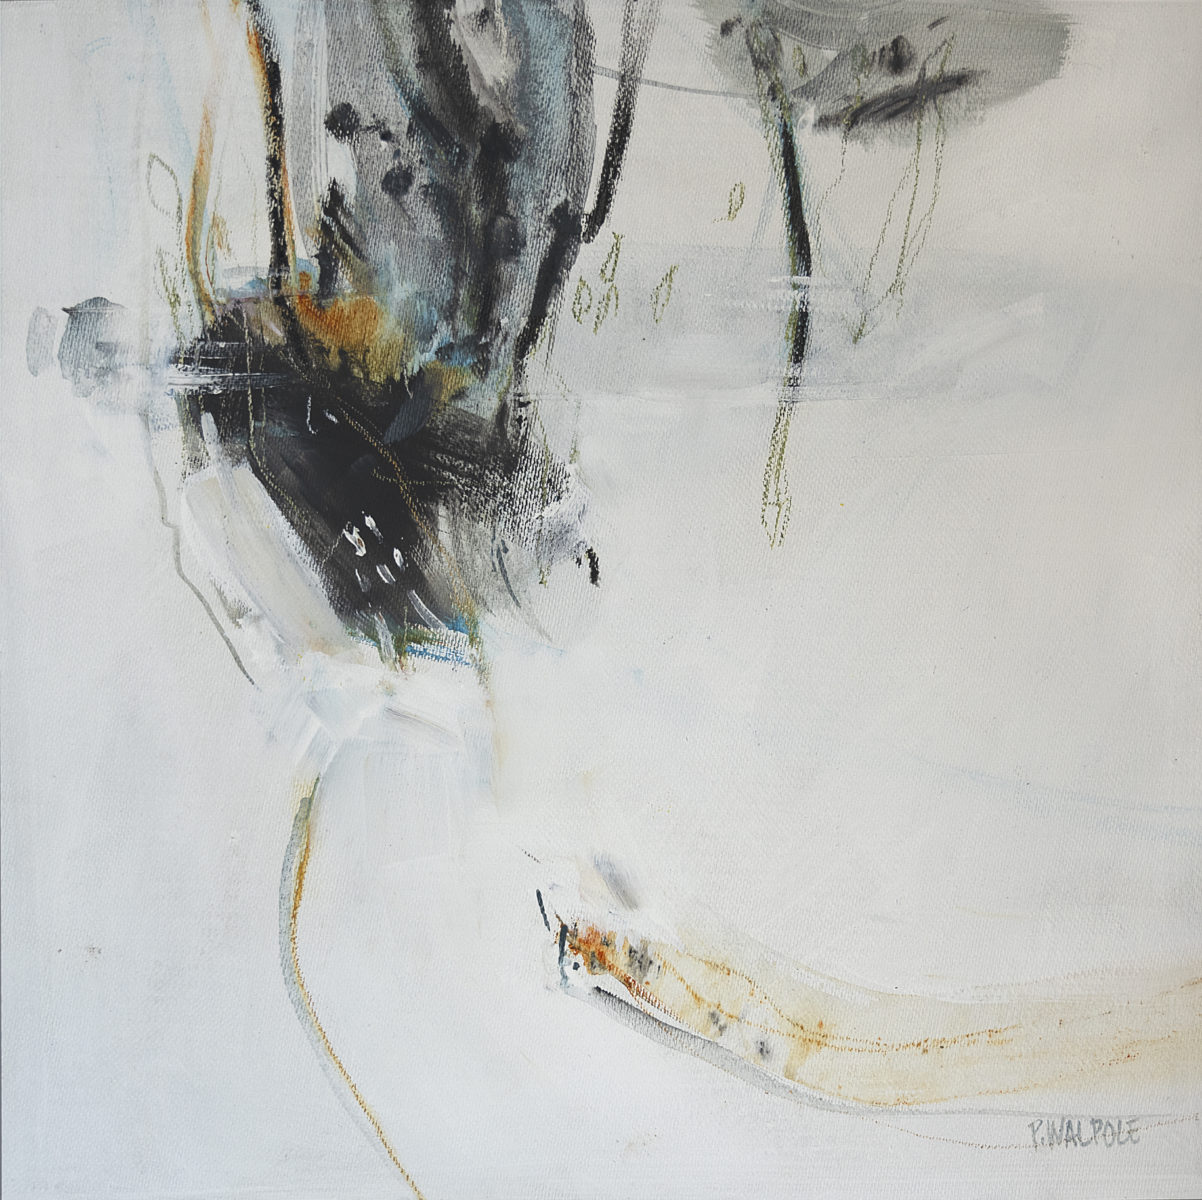 Skimming The Surface II | Pam Walpole | Mixed media on canvas on board | 49.5 x 49.5 cm, framed in aluminium | $980